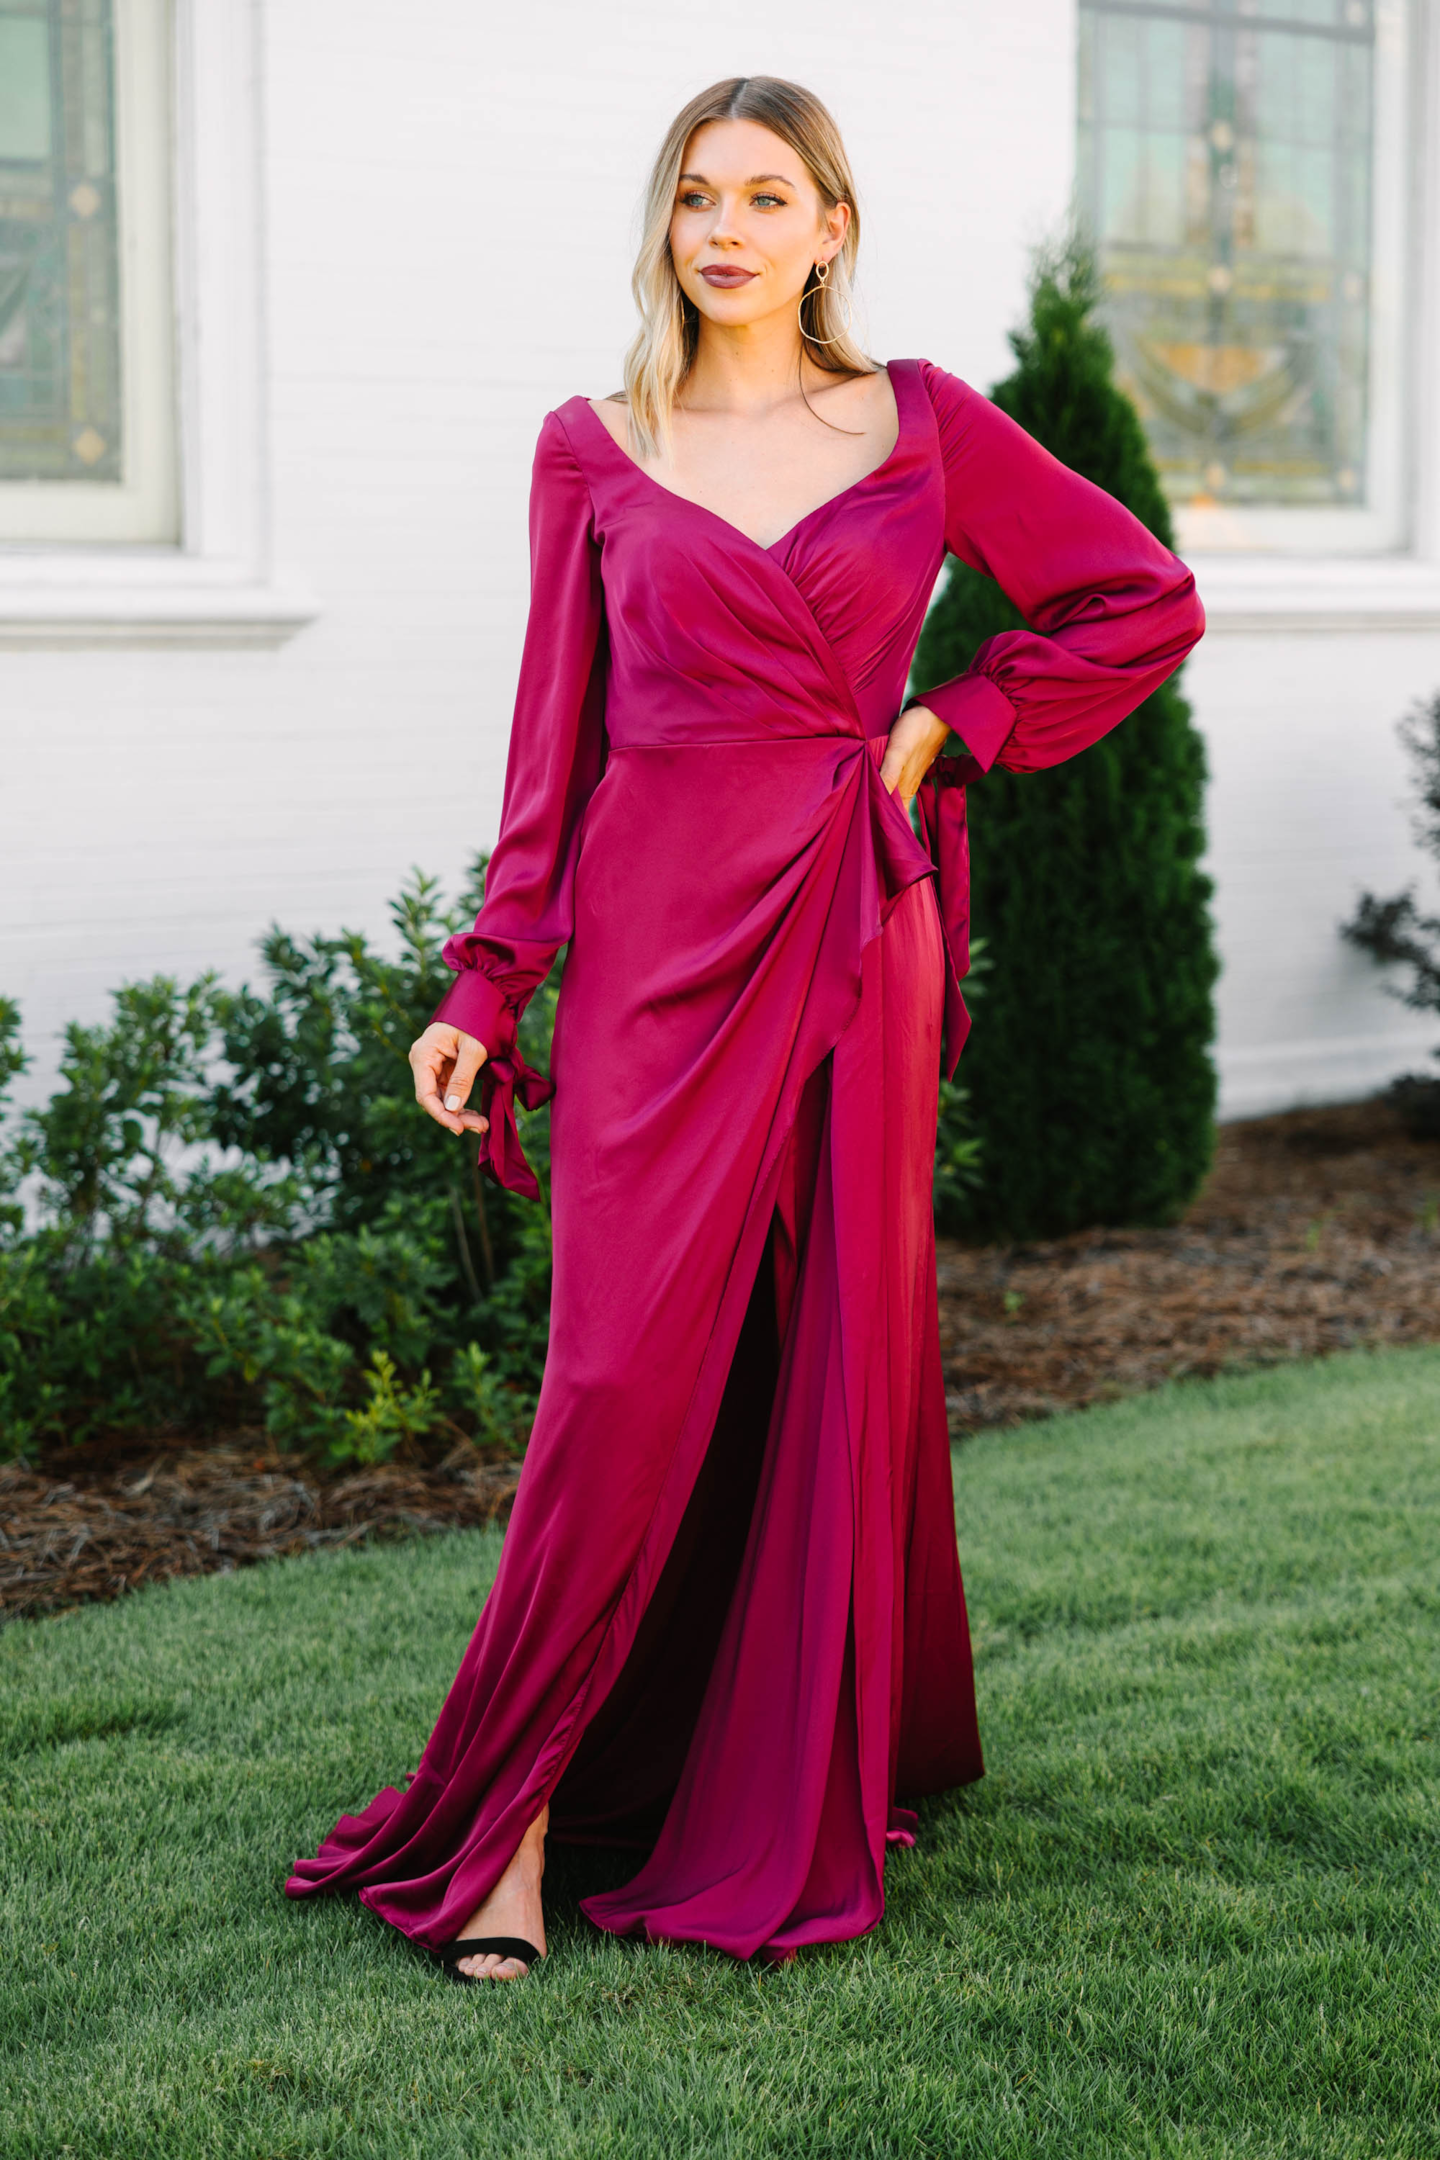 https://shopthemint.com/products/living-a-dream-burgundy-red-satin-maxi-dress?variant=39686133448762